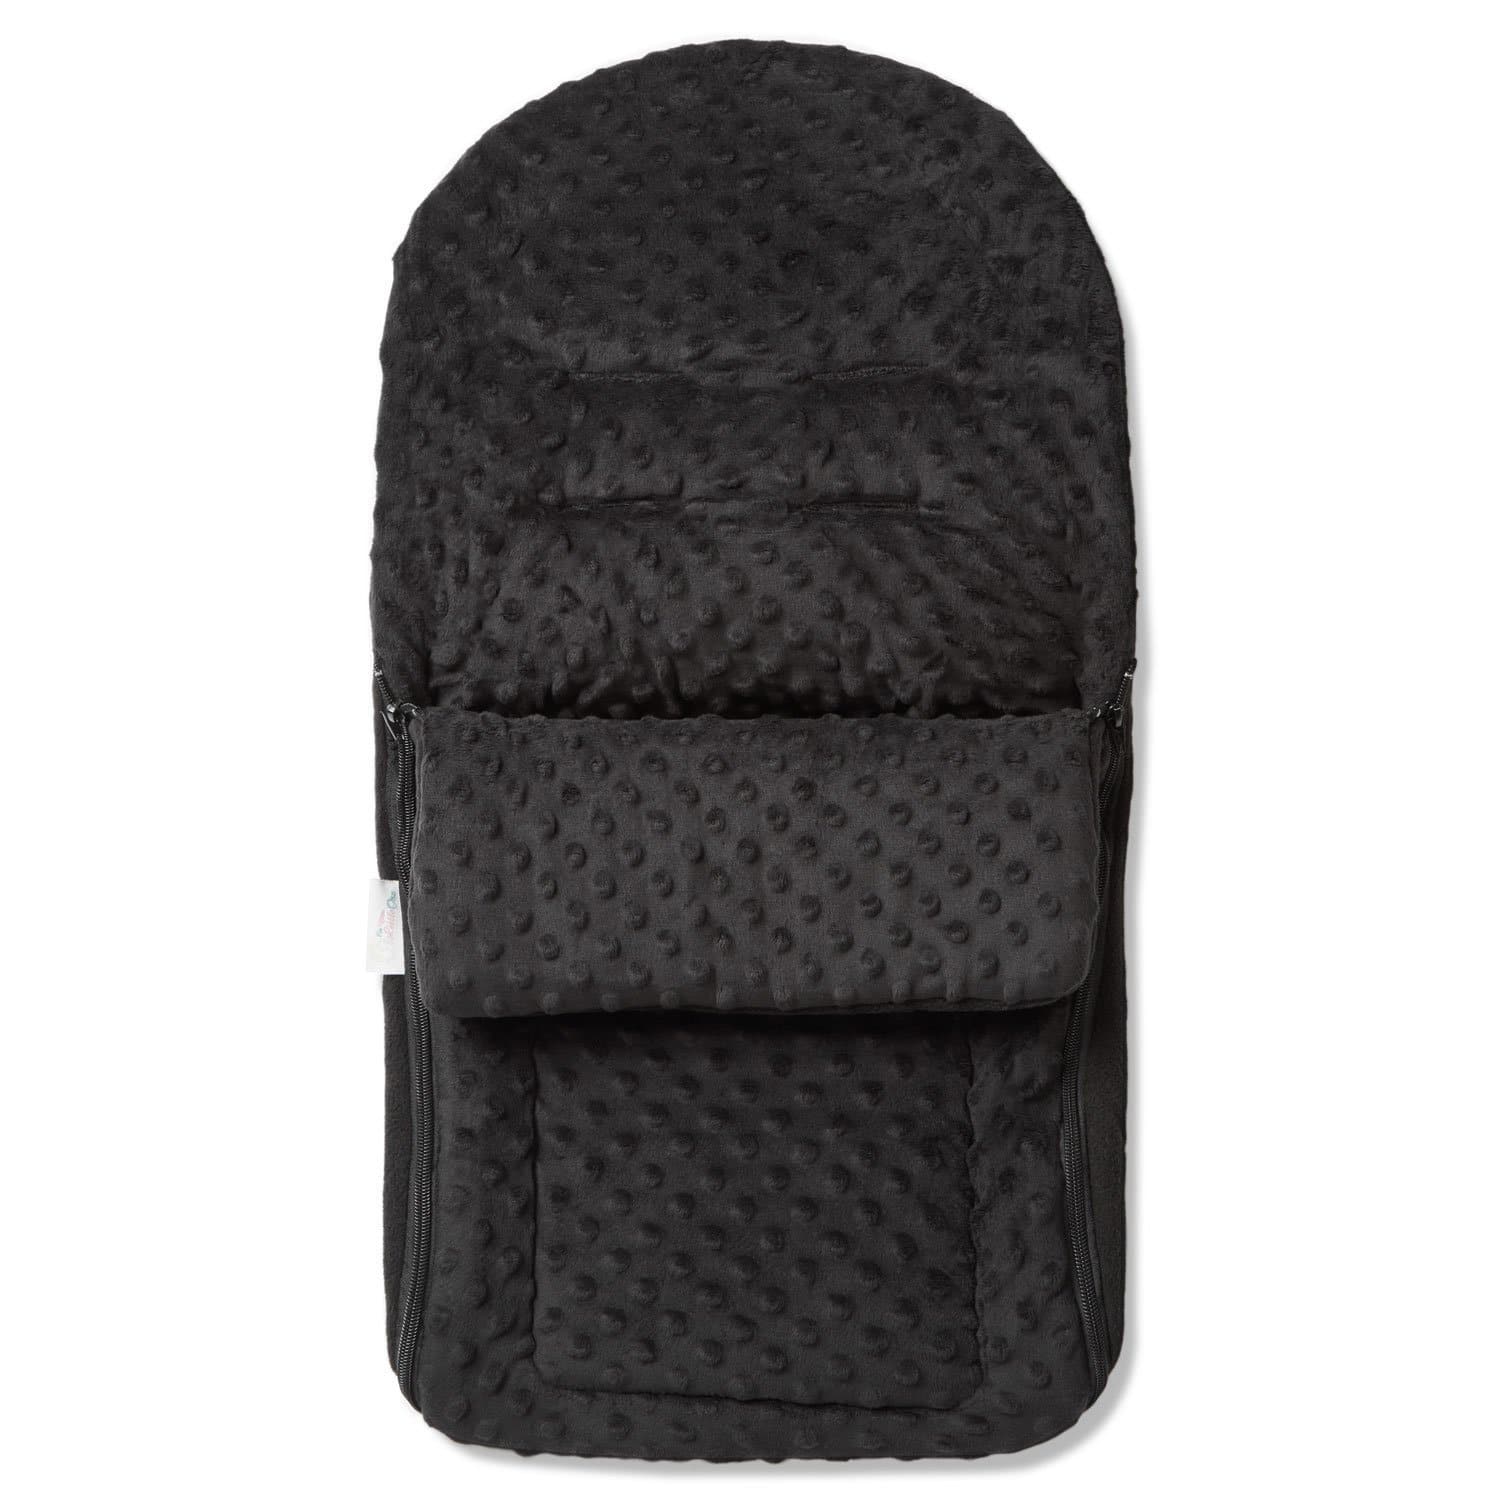 Dimple Car Seat Footmuff / Cosy Toes Compatible with Cybex - Black / Fits All Models | For Your Little One